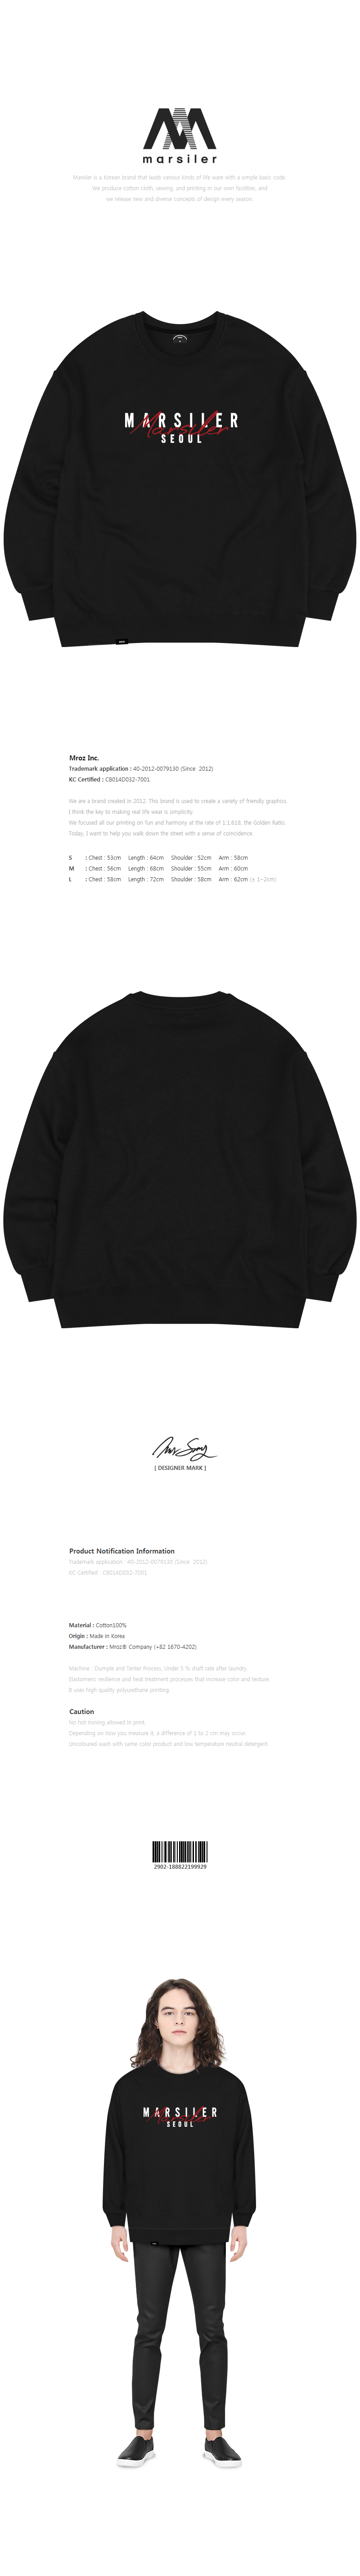 Signature Crewneck - Ready-to-Wear 1AA4RD